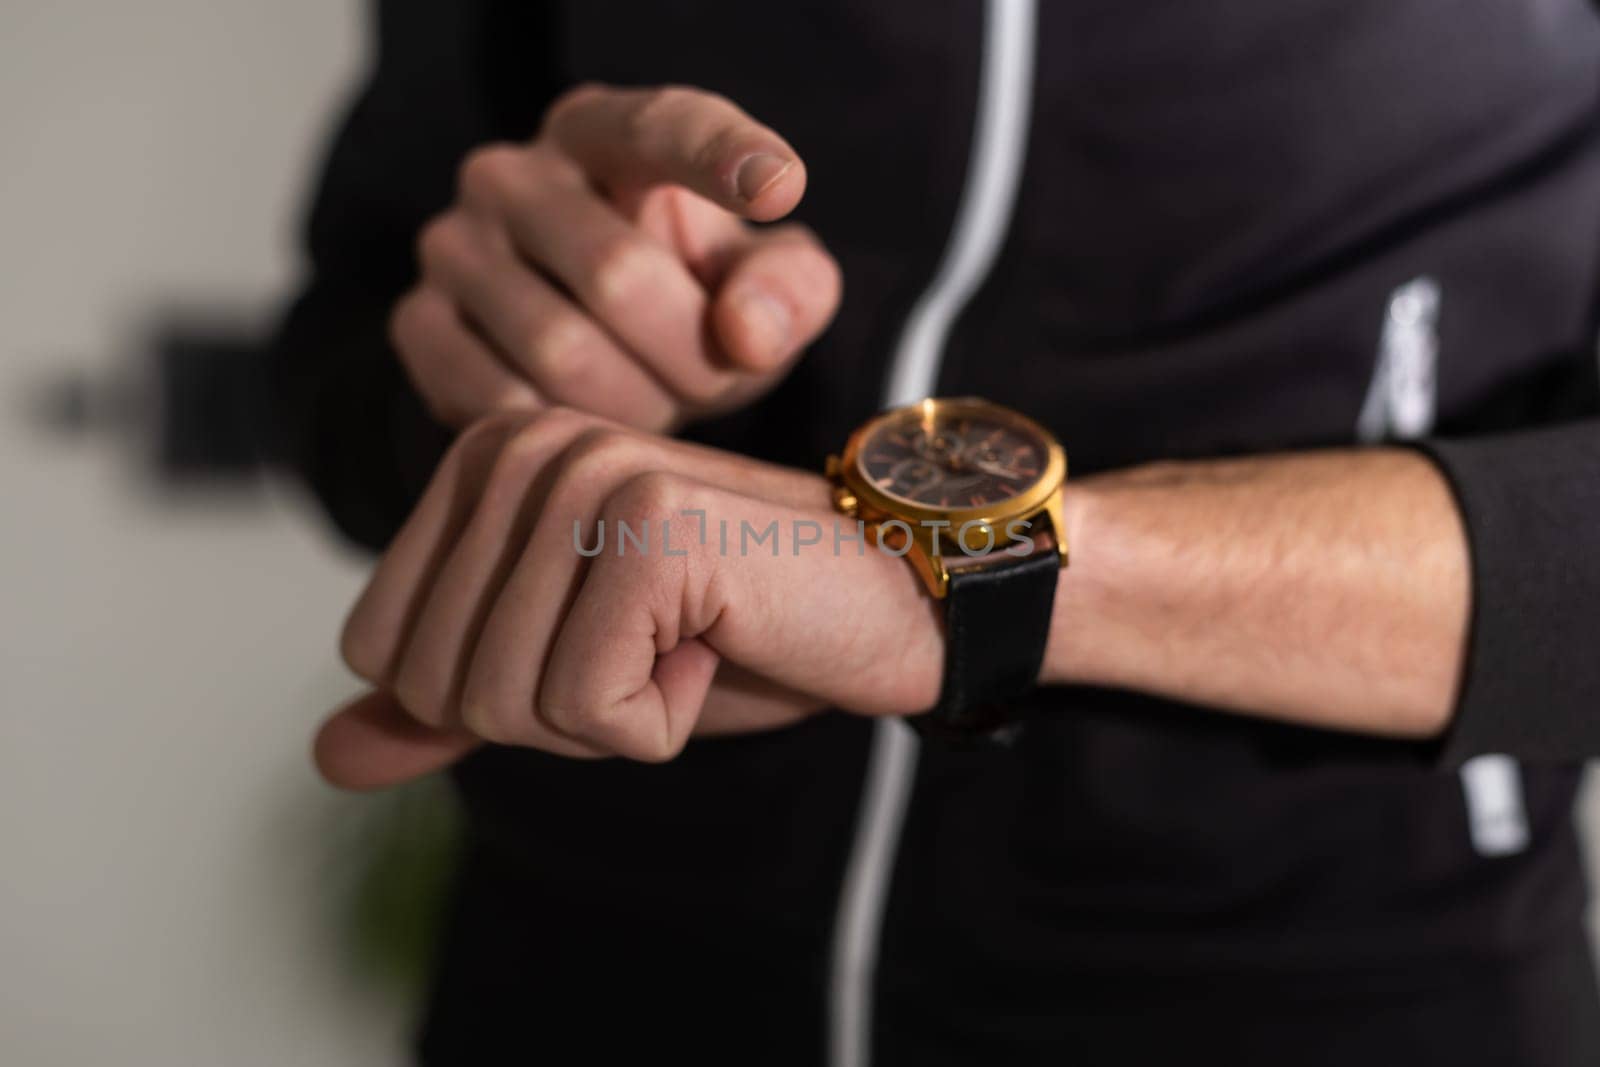 A watch on a man's hand of a man, a close-up of a man's watch on his hand.